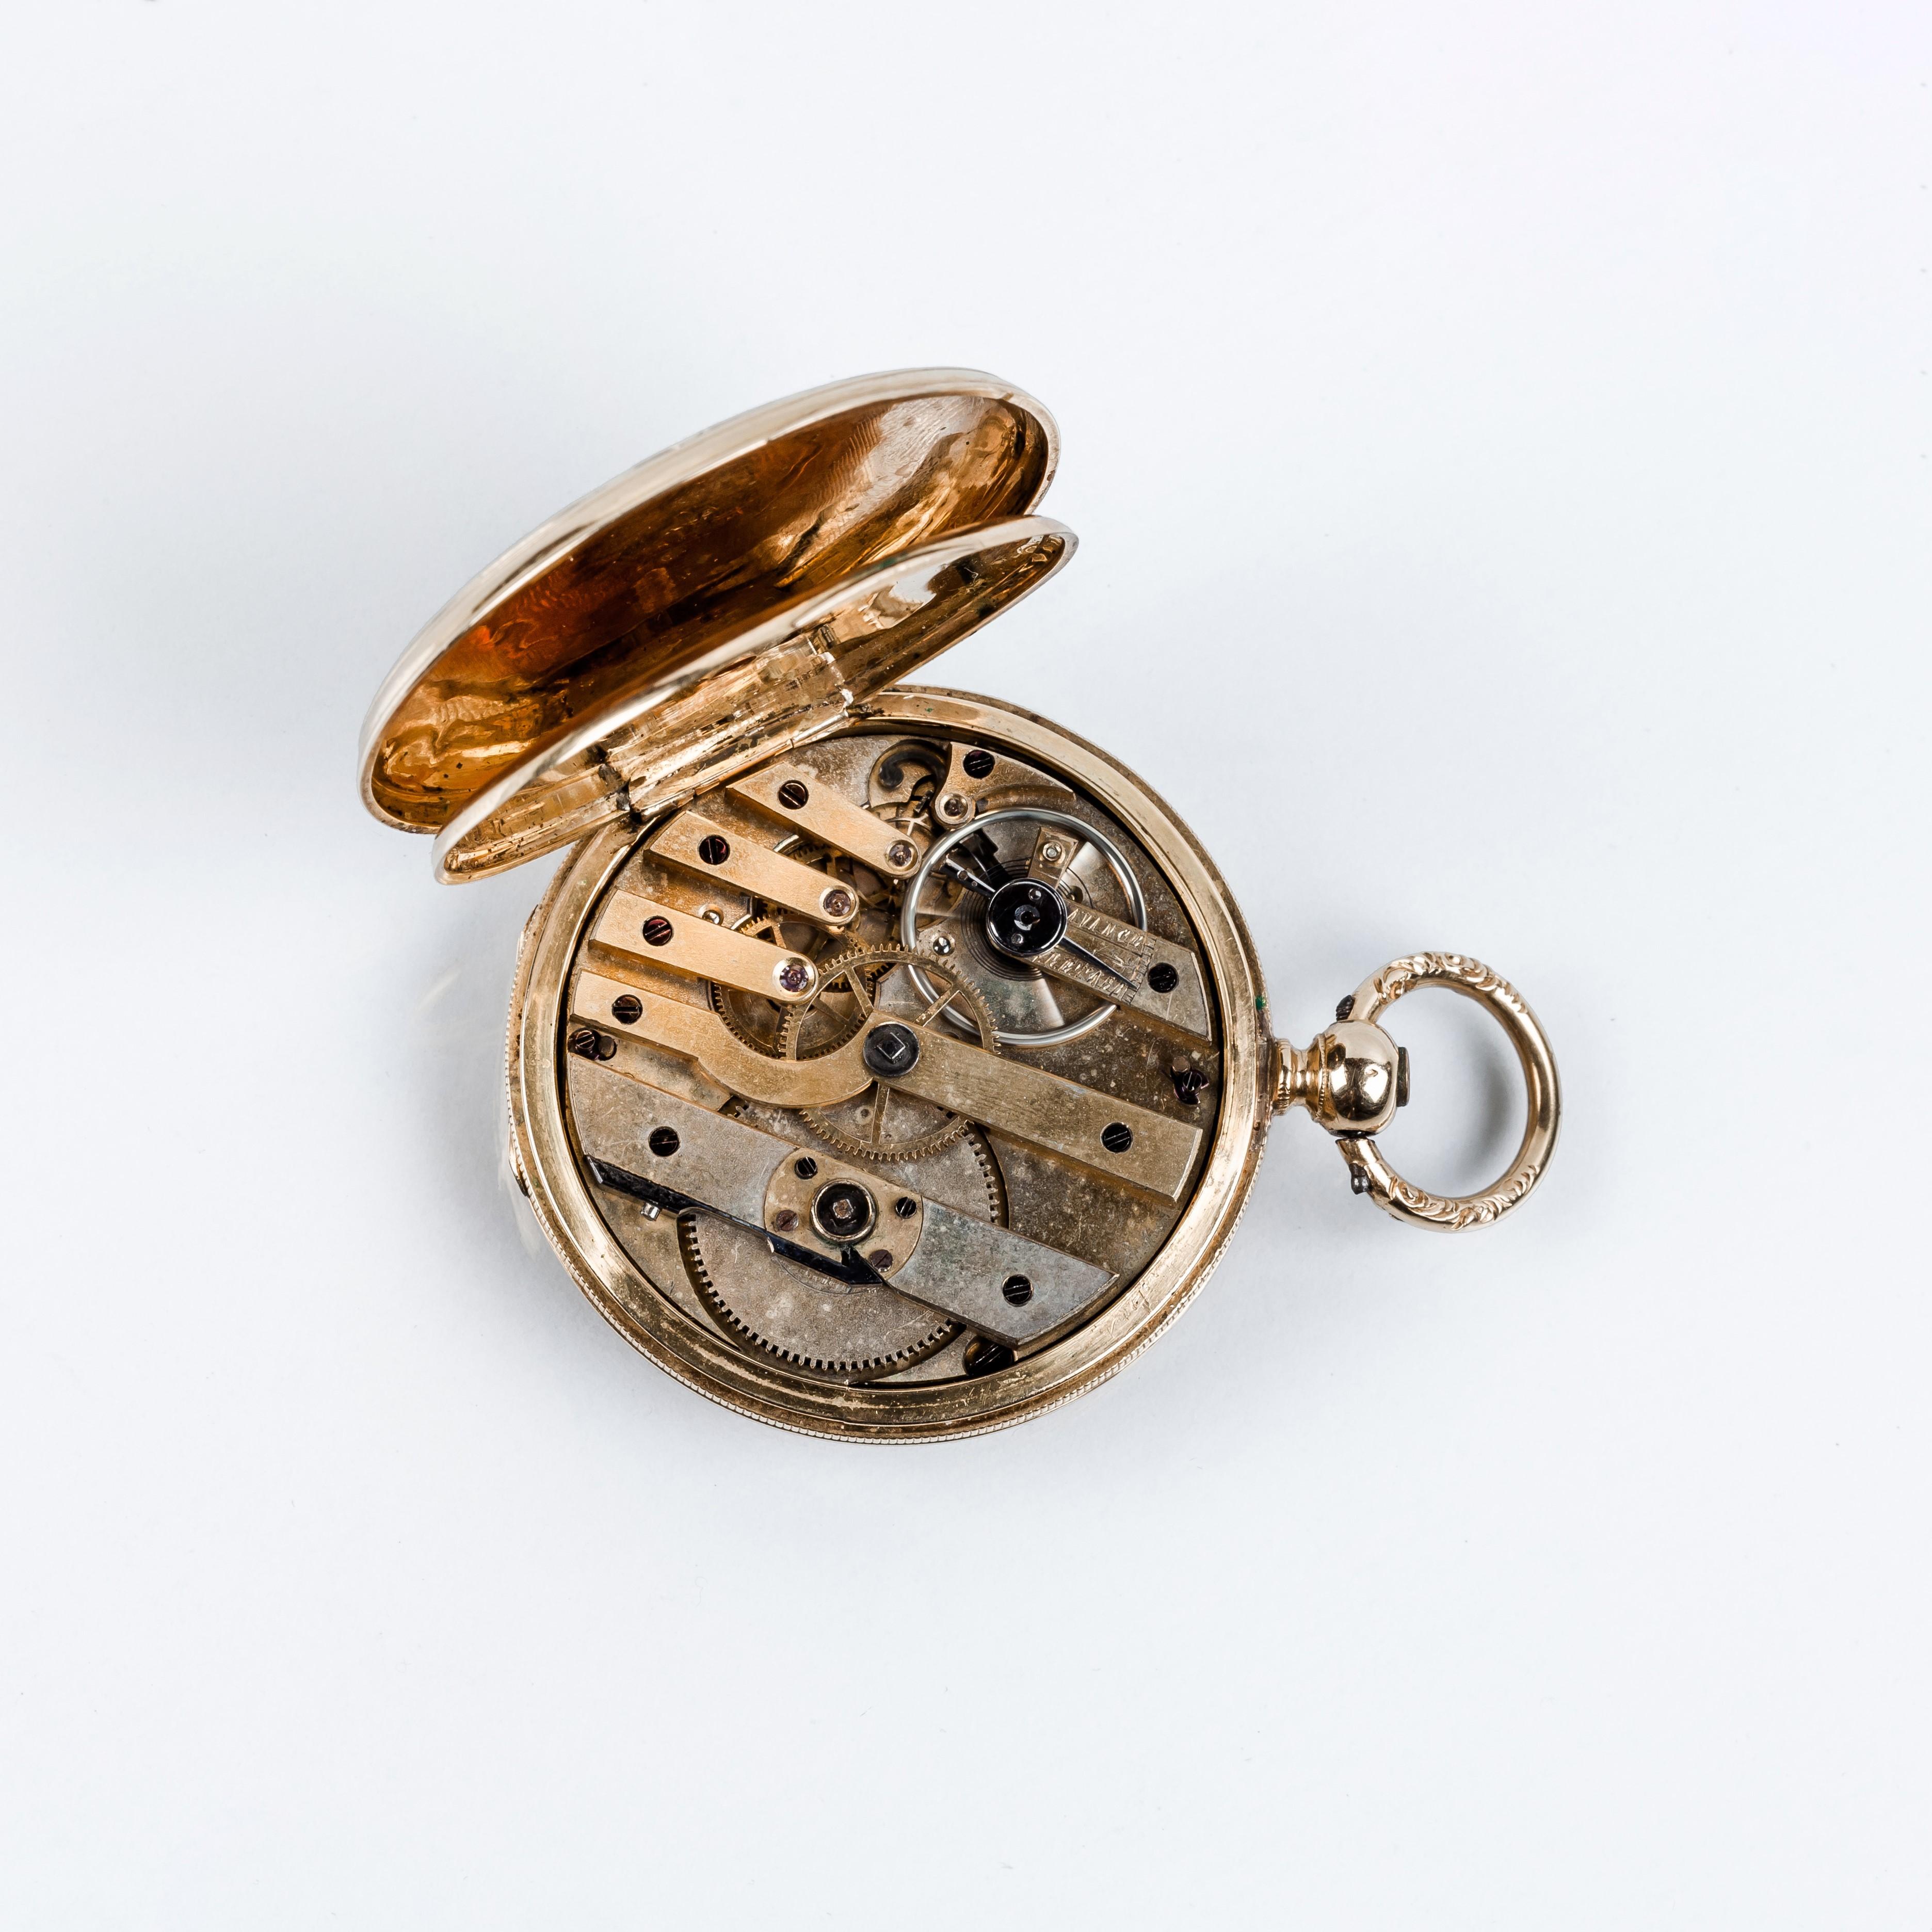 Exquisite Gold hunter-case Swiss pocket watch COURVOISIER #10673.
Golden case with three 43mm/1.69in extrathin lids showing a beautiful dècor of a peasant with a pitcher by a well and a flower arrangement vase.
Dustcovers present anchor escapement